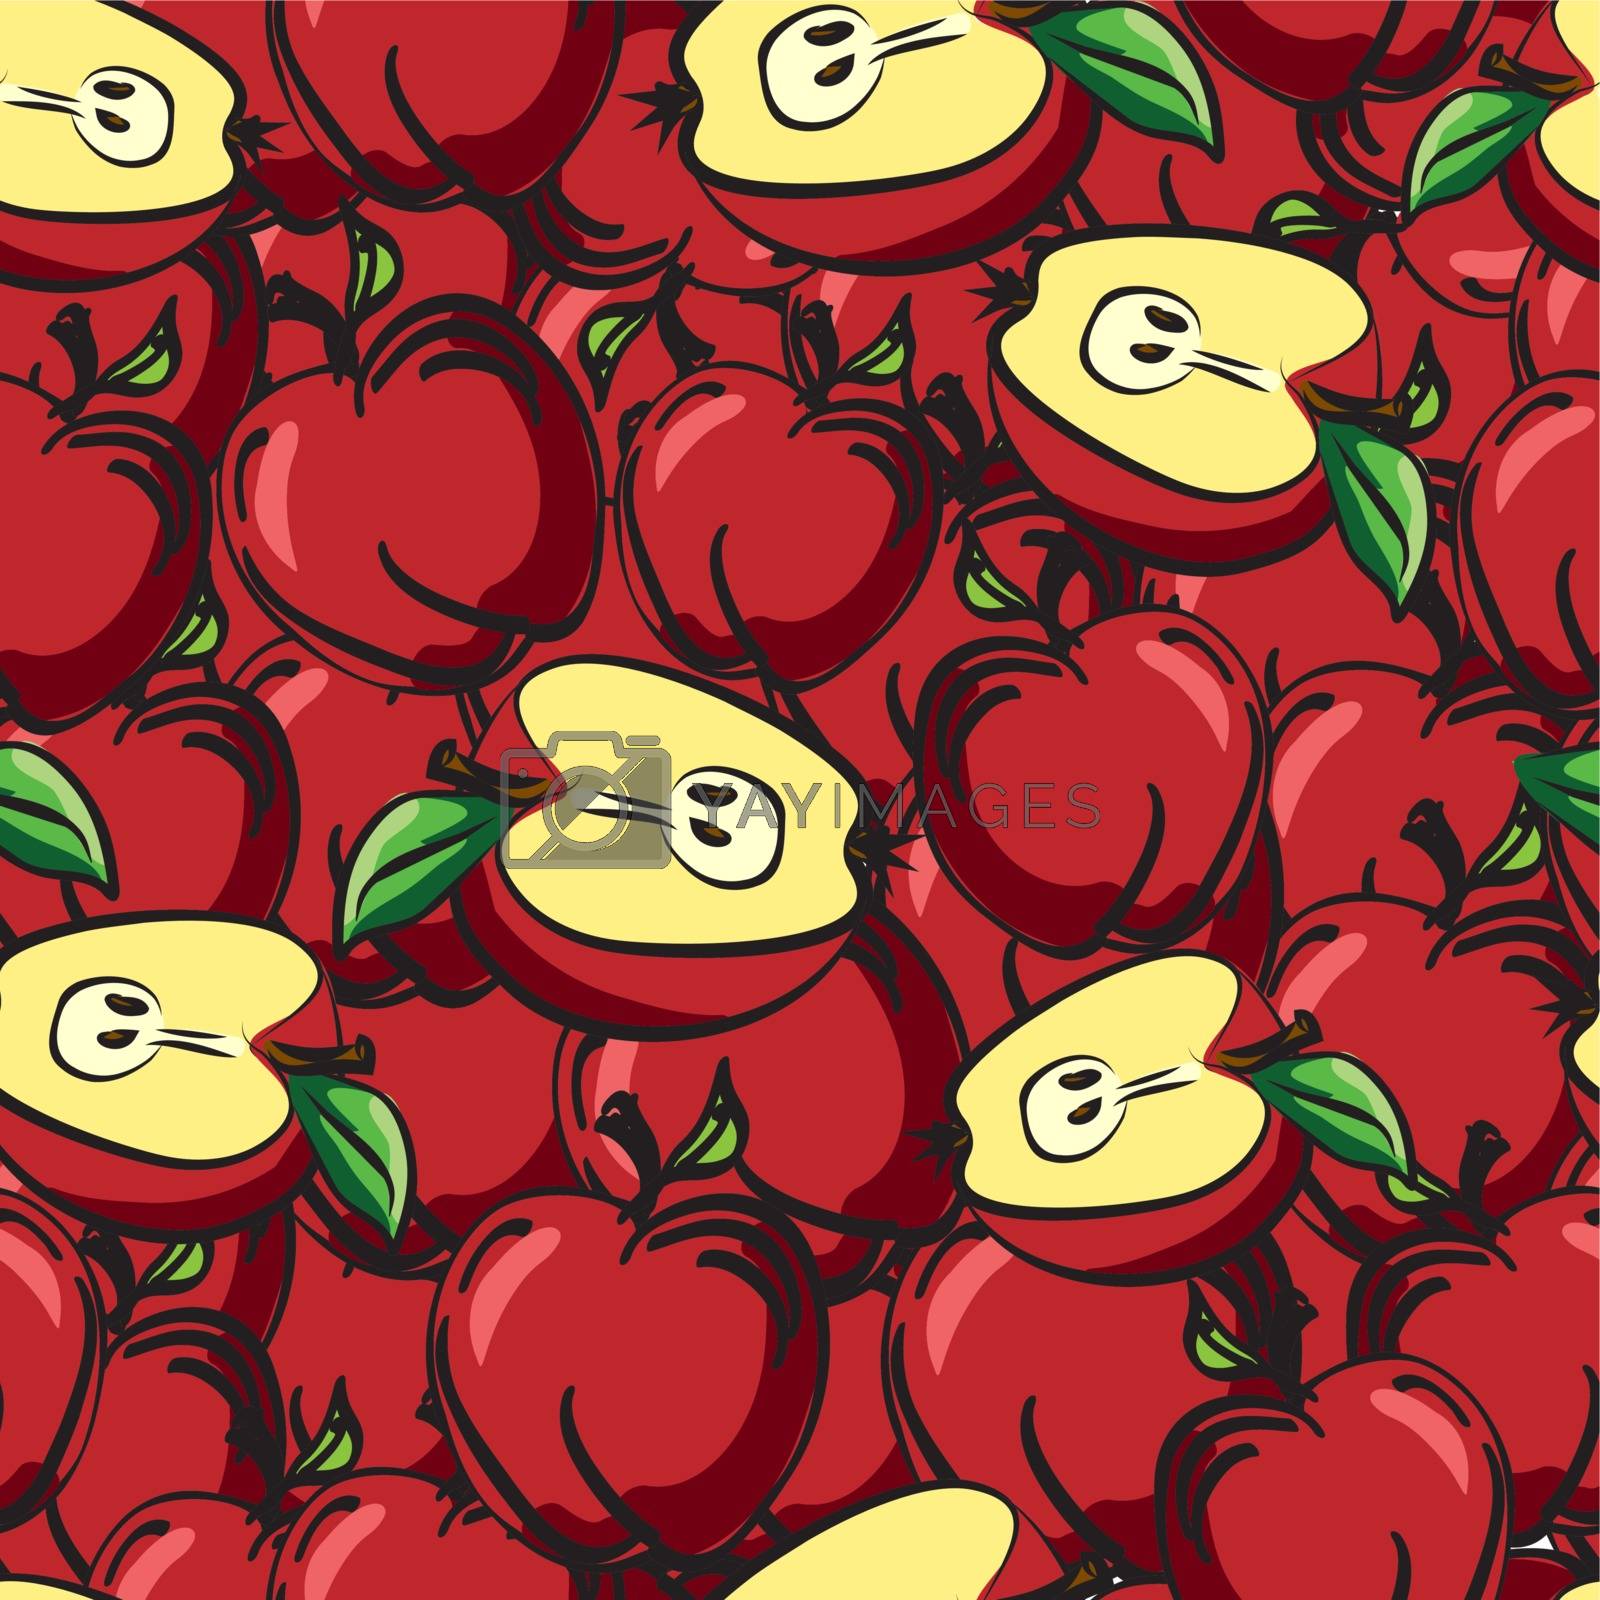 Royalty free image of Apples fruits sketch drawing seamless background by PixAchi